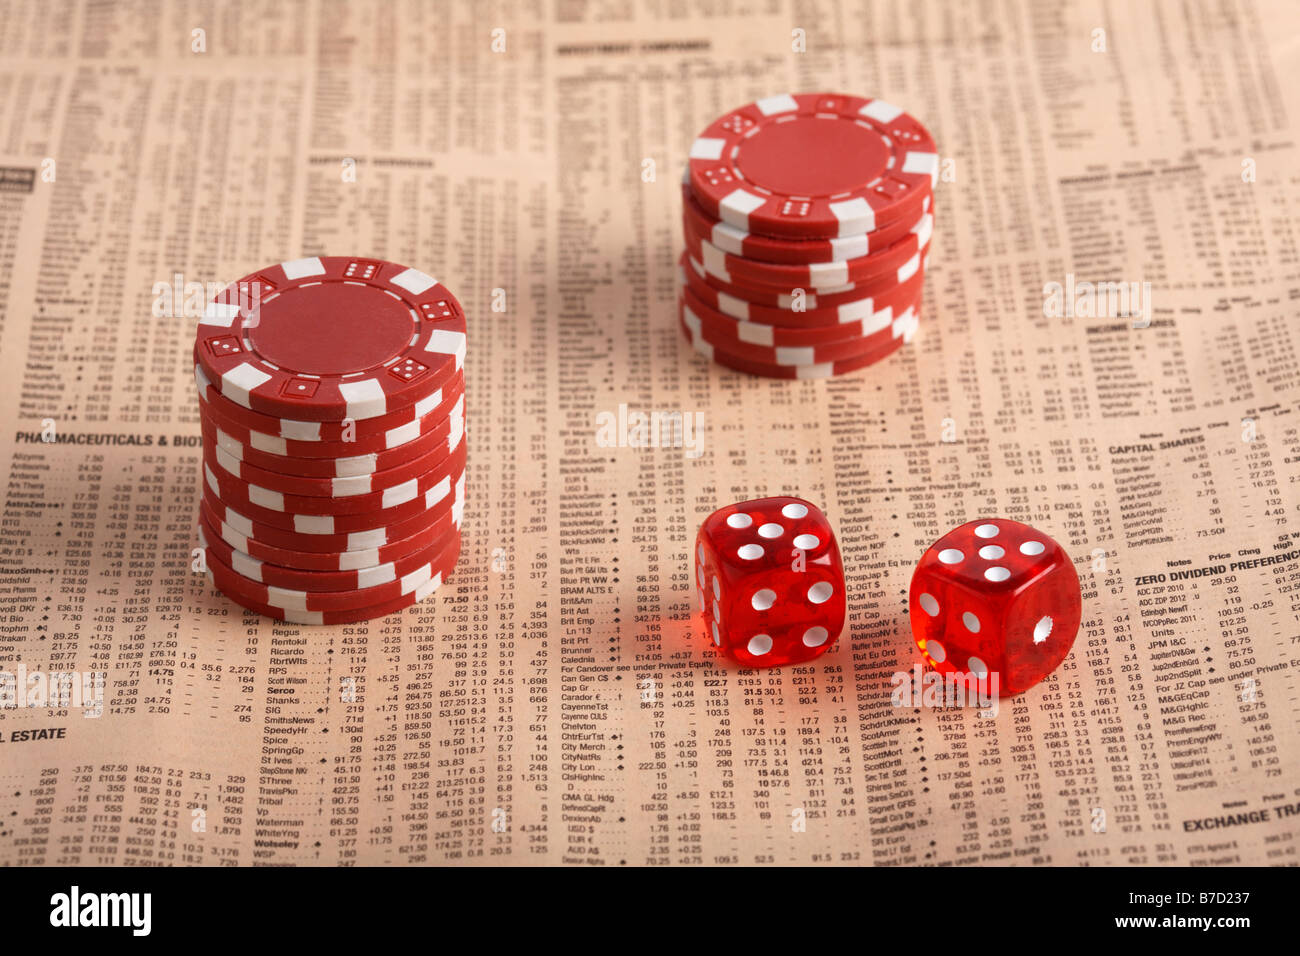 stacks of poker chips and pair of dice sitting on share information in a copy of the financial times concept of gambling on the stock market shares Stock Photo